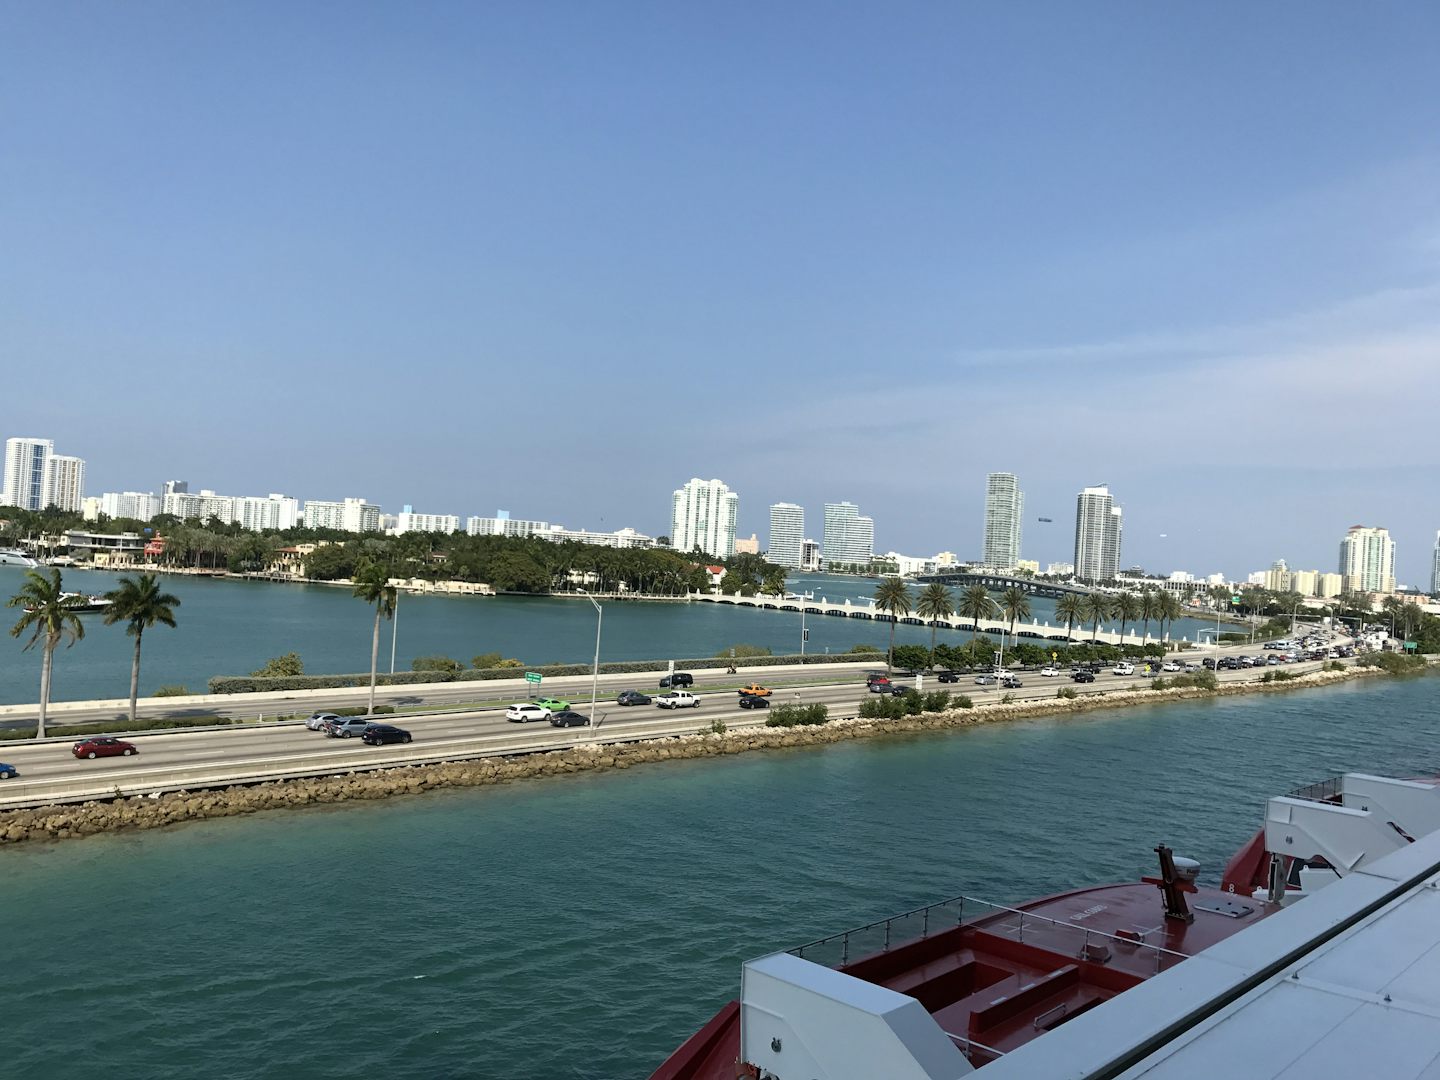 Leaving the port of Miami for a week of fun in the sun